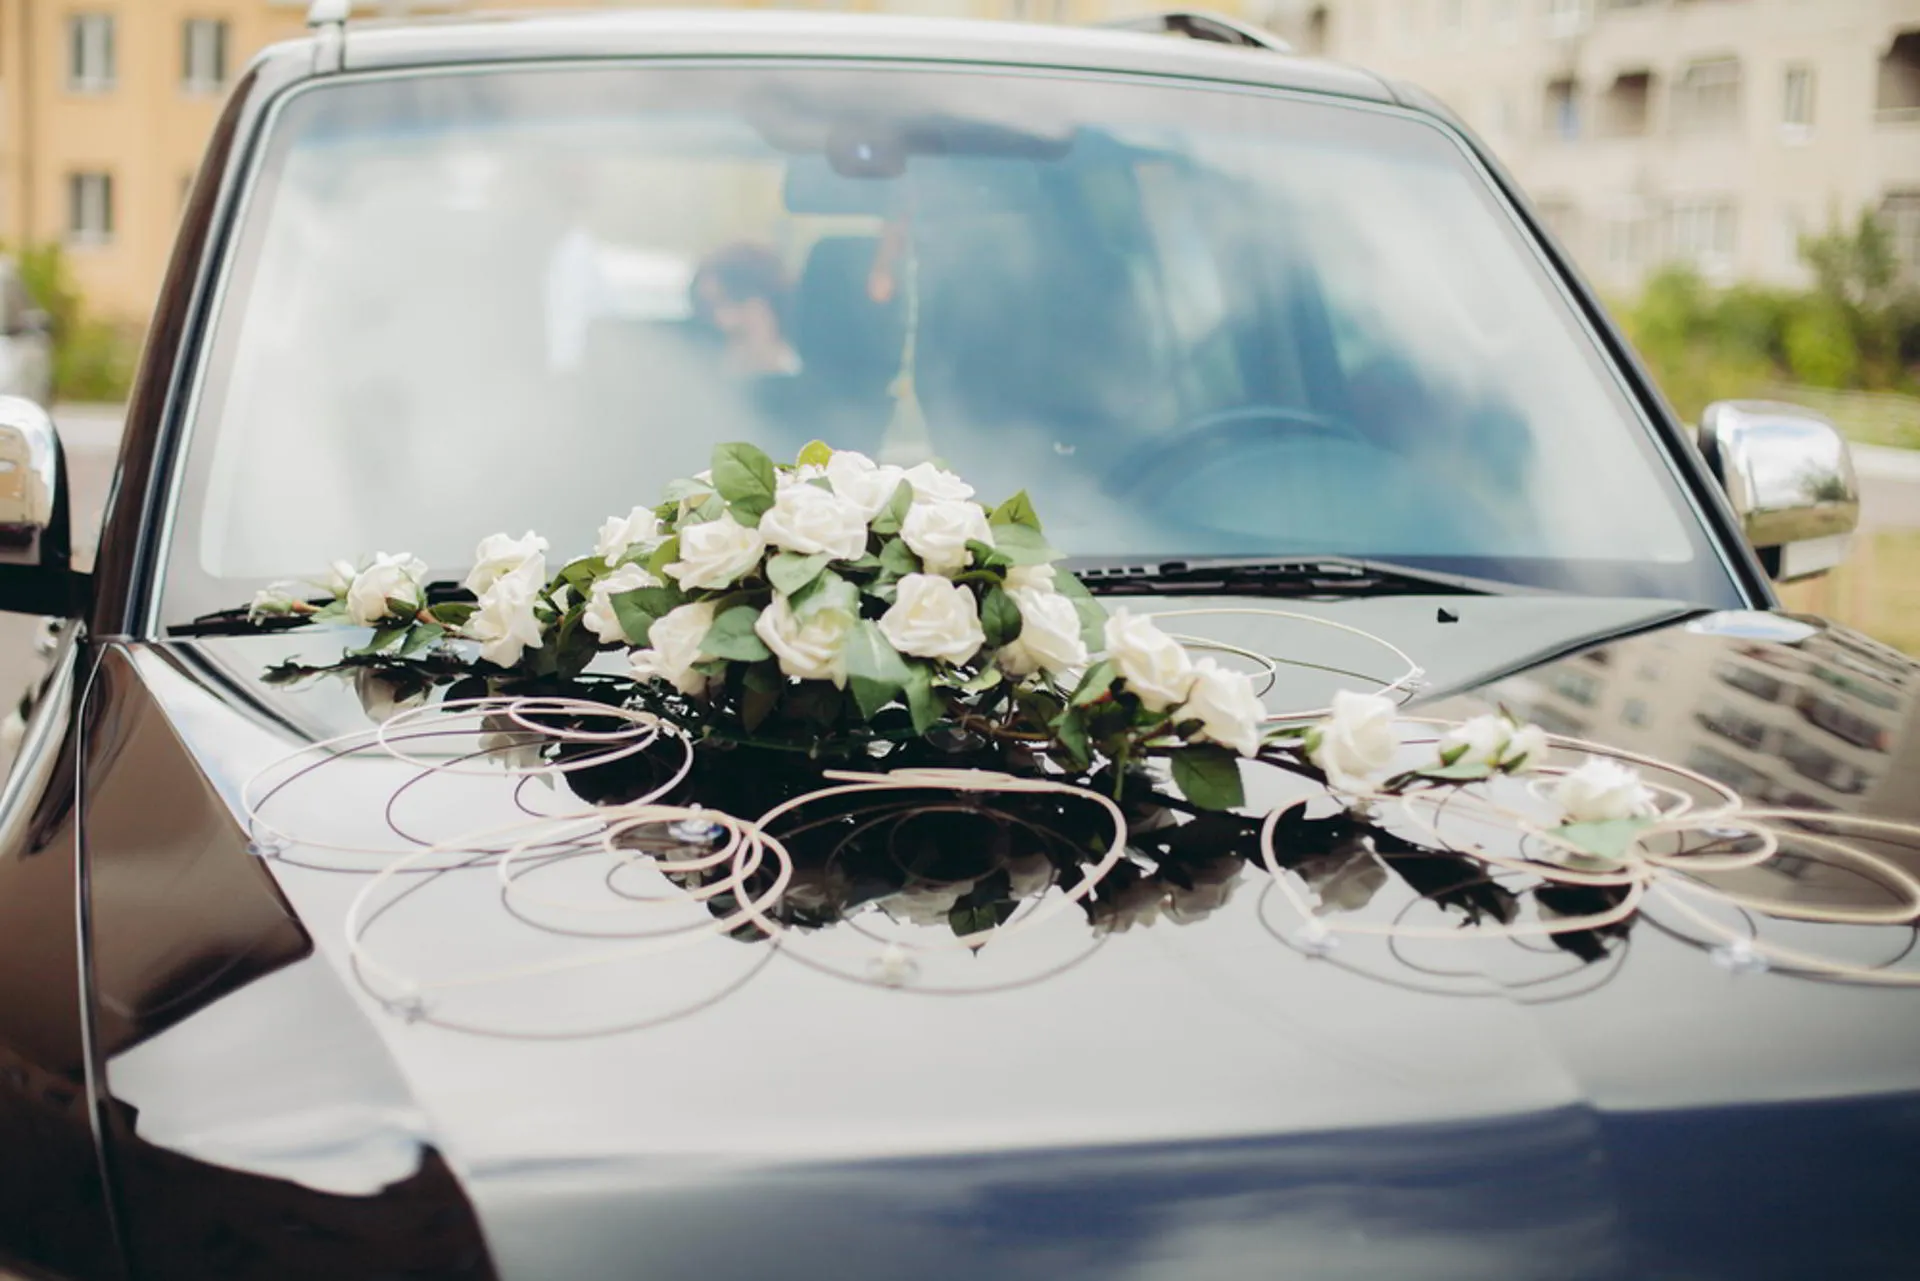 Wedding car decorated with cauliflowers, carrots and brinjal sets a new  trend - Times of India